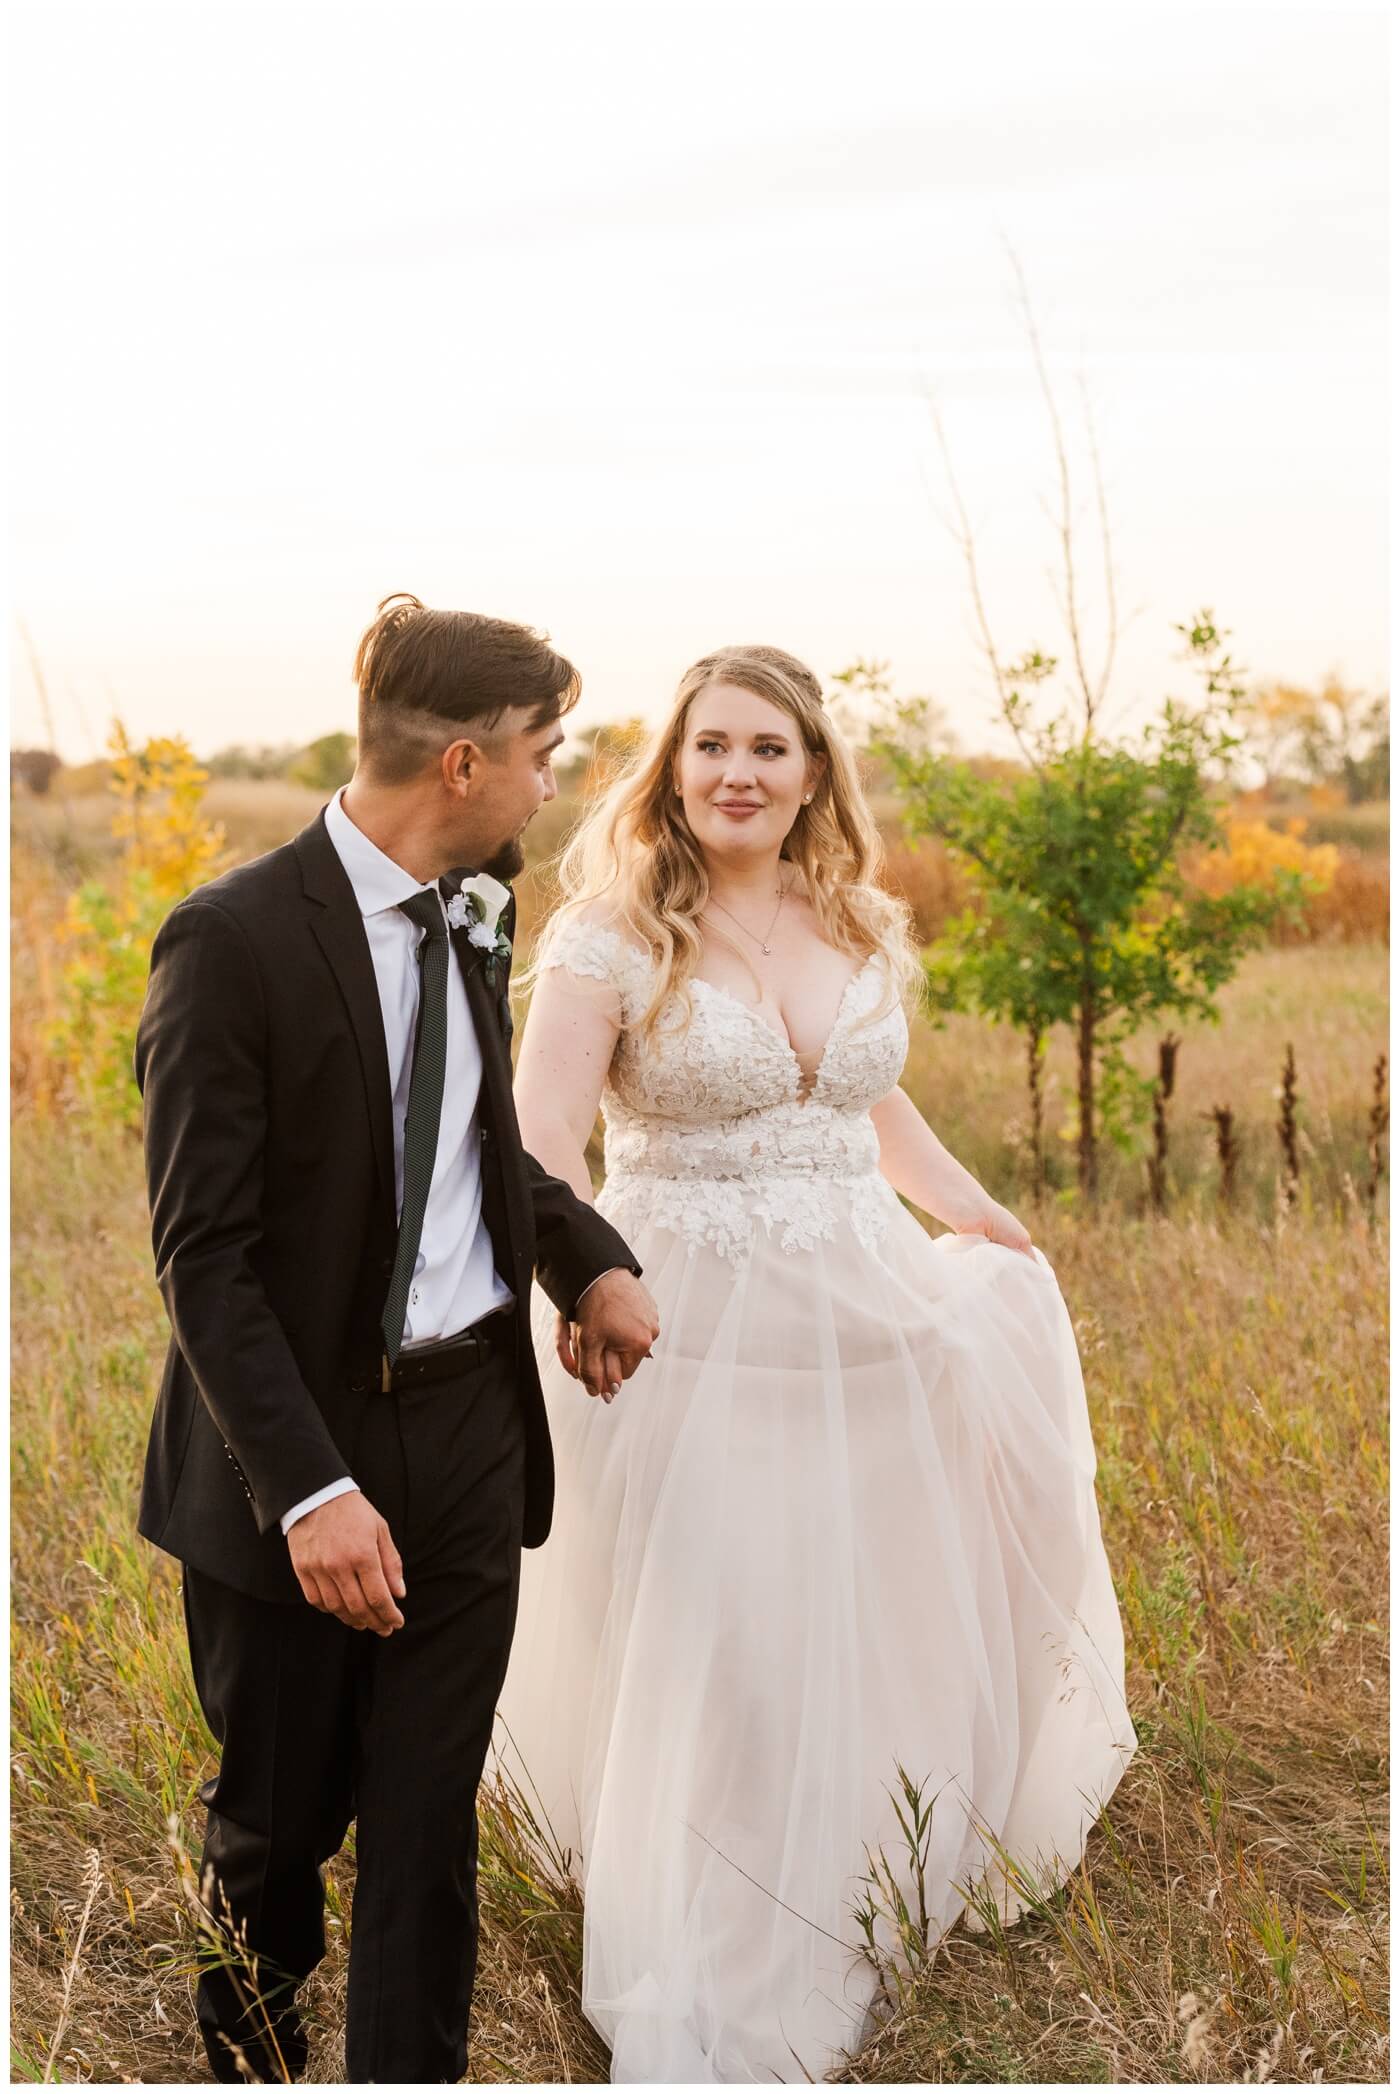 Orrin-Jade-35-Weyburn-Wedding-Groom-leads-his-bride-out-of-the-tall-grass-1